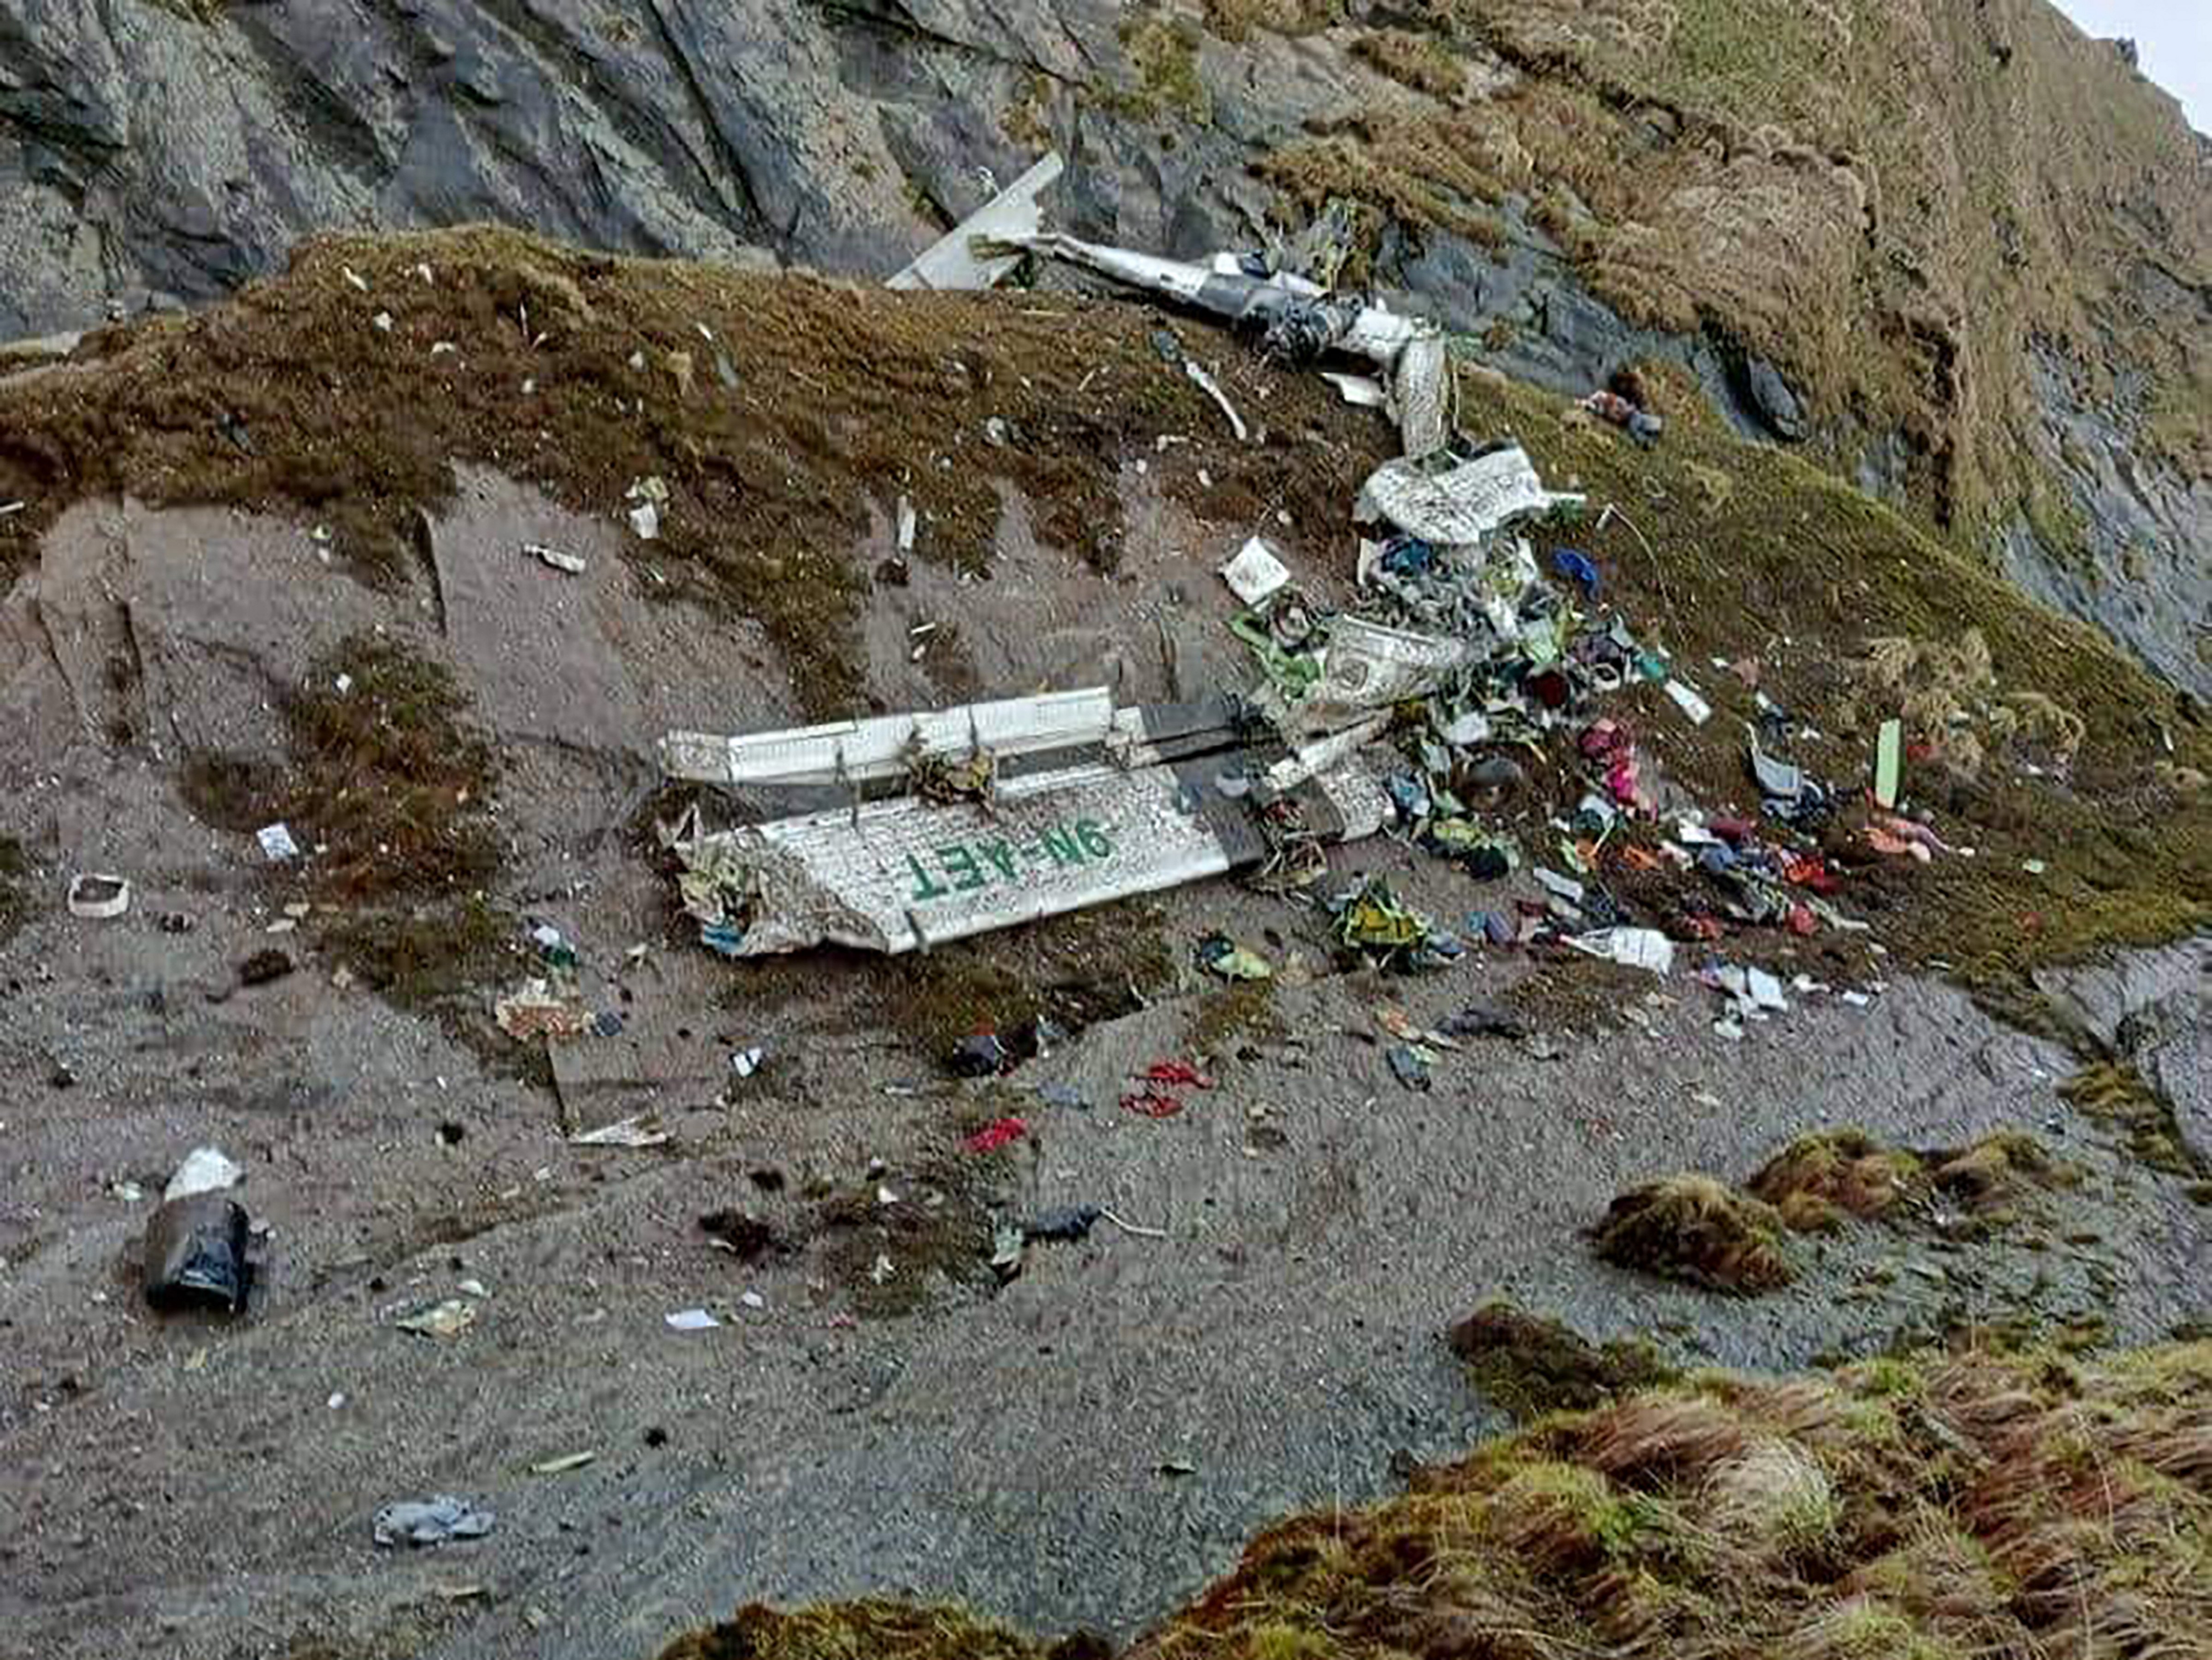 21 bodies recovered from Tara Air plane crash site in Nepal